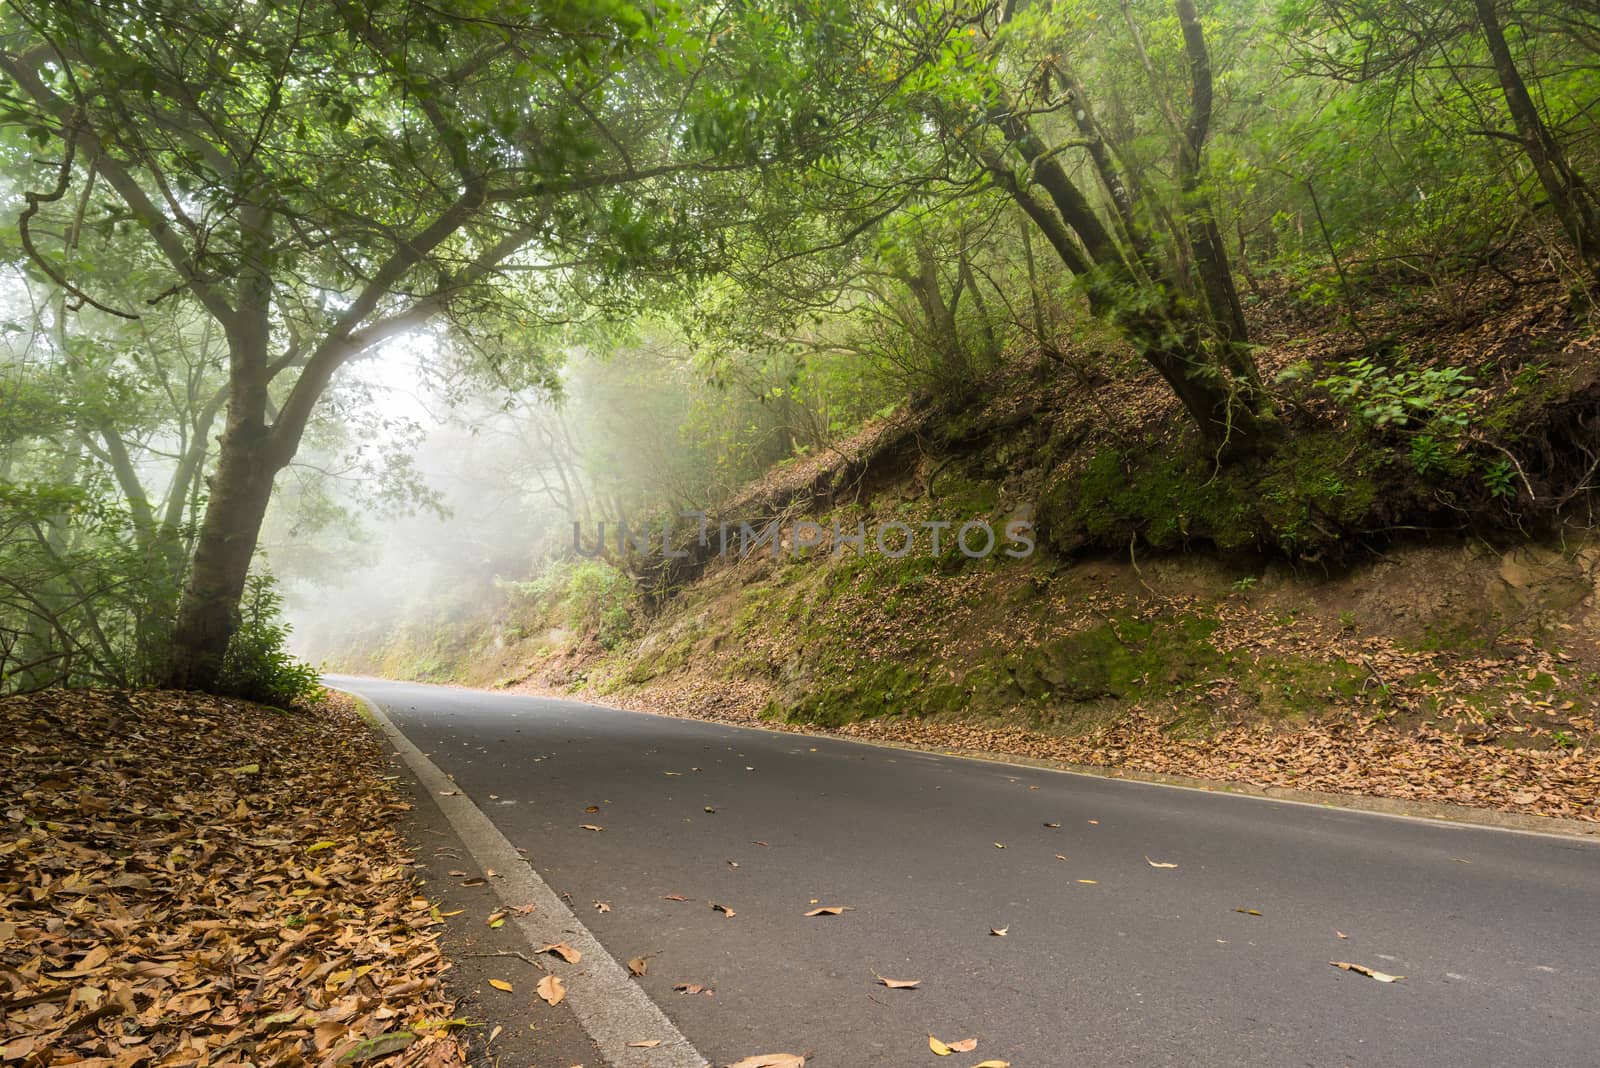 Road in the misty forest. by HERRAEZ